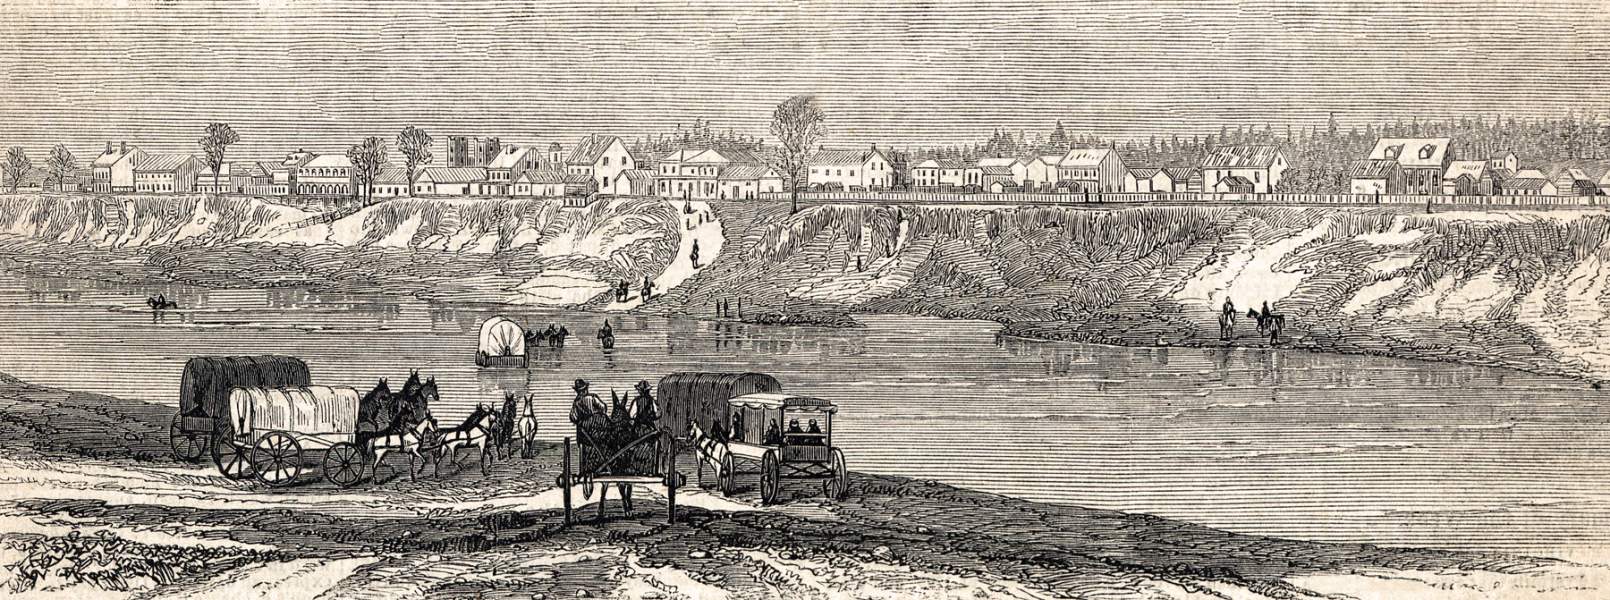 Natchitoches. Louisiana, April 1864, artist's impression, zoomable image